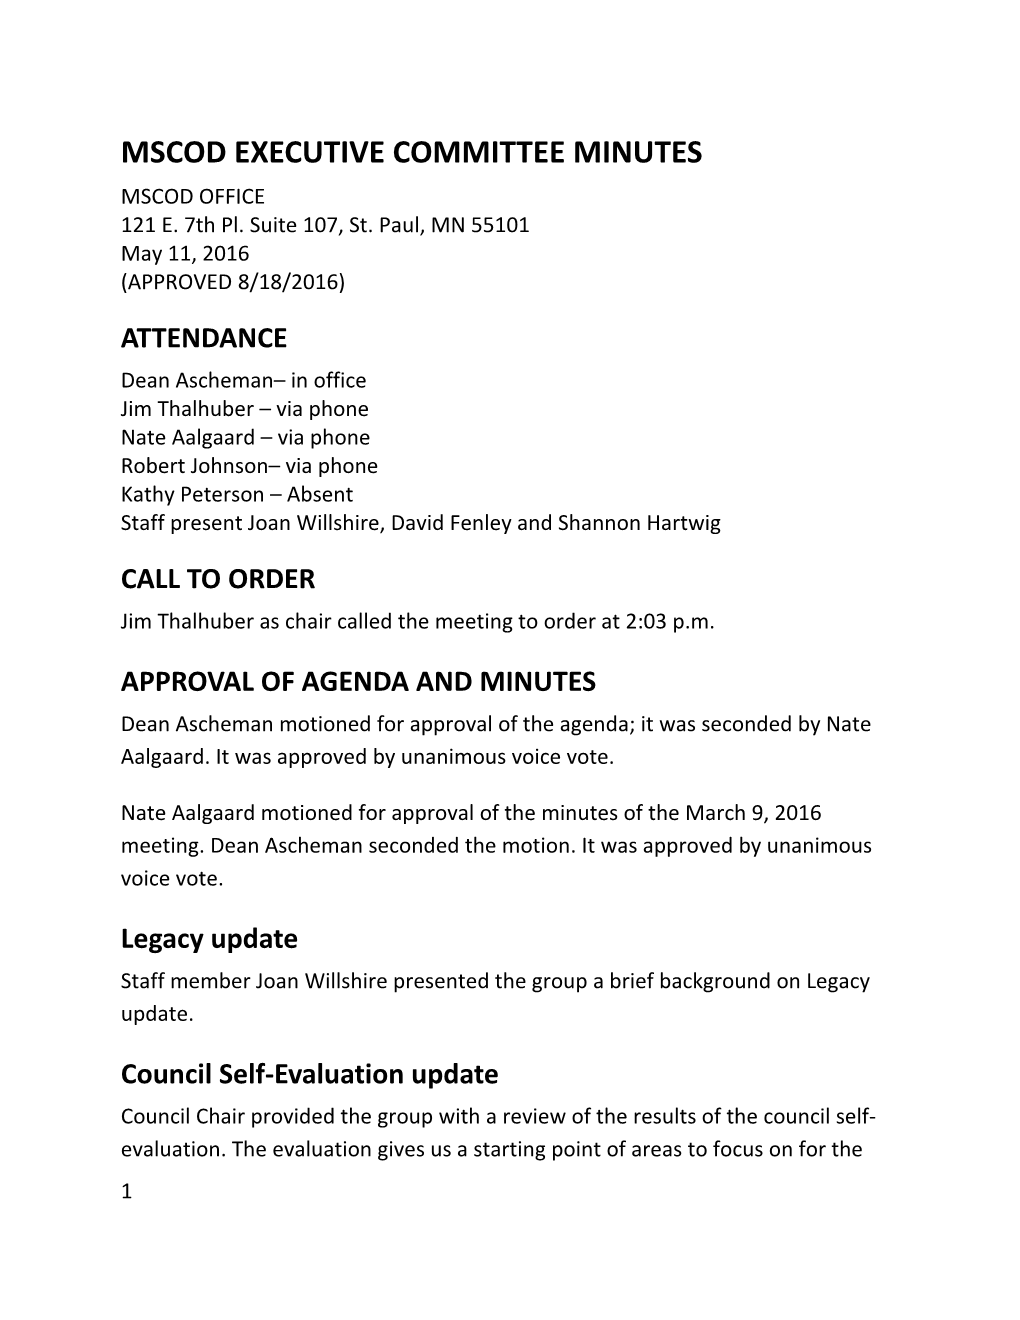 MSCOD Executive Committee Meeting Minutes, 05/11/2016